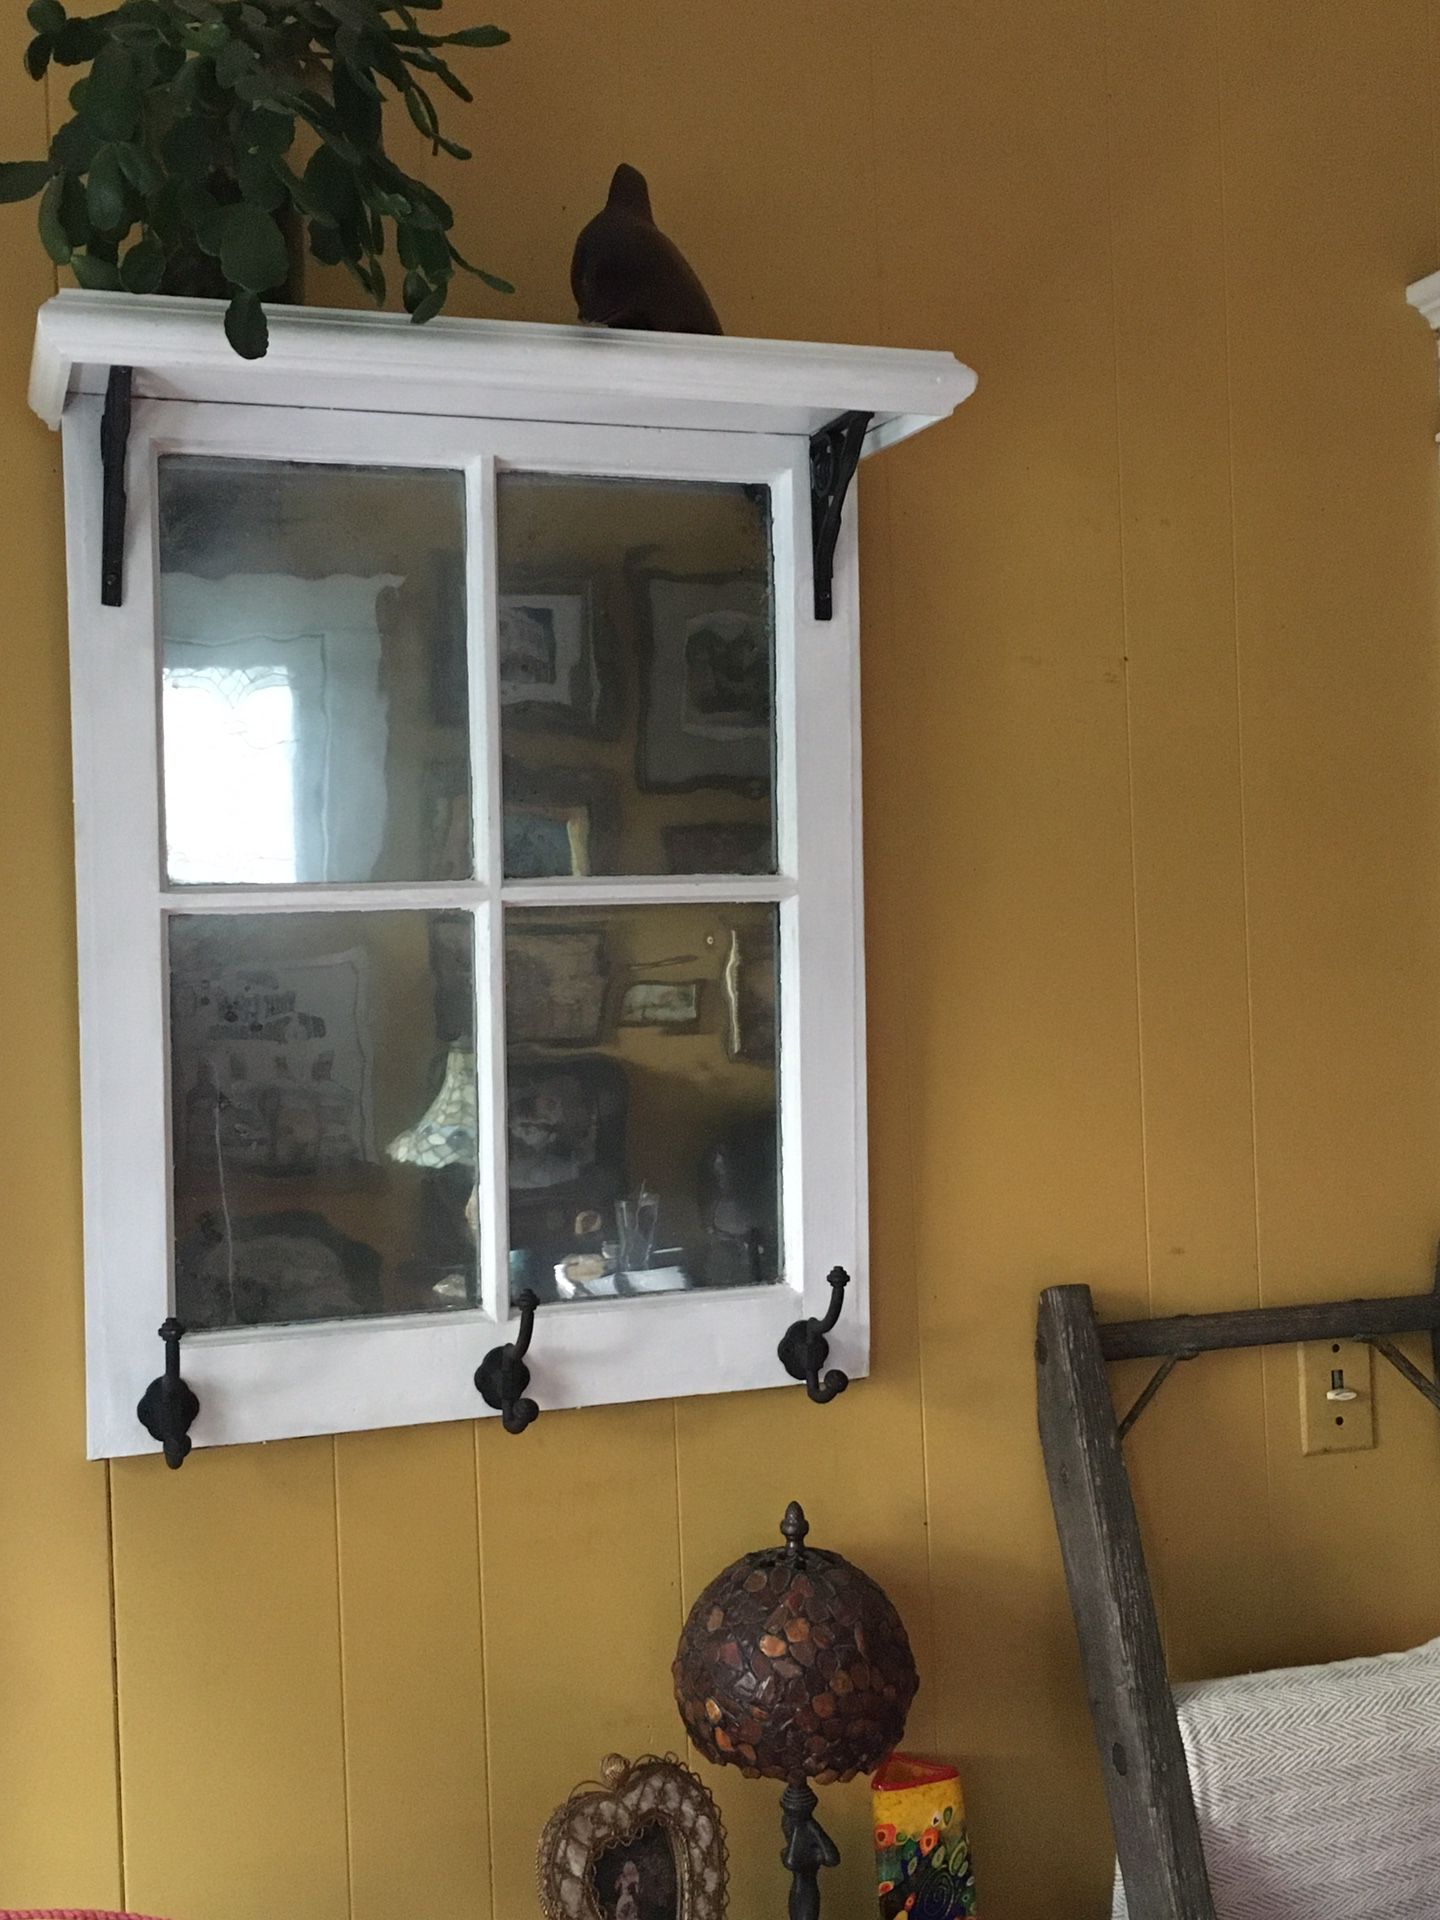 Decorative vintage window( glass panes are antique mirrored) with shelf and hooks.